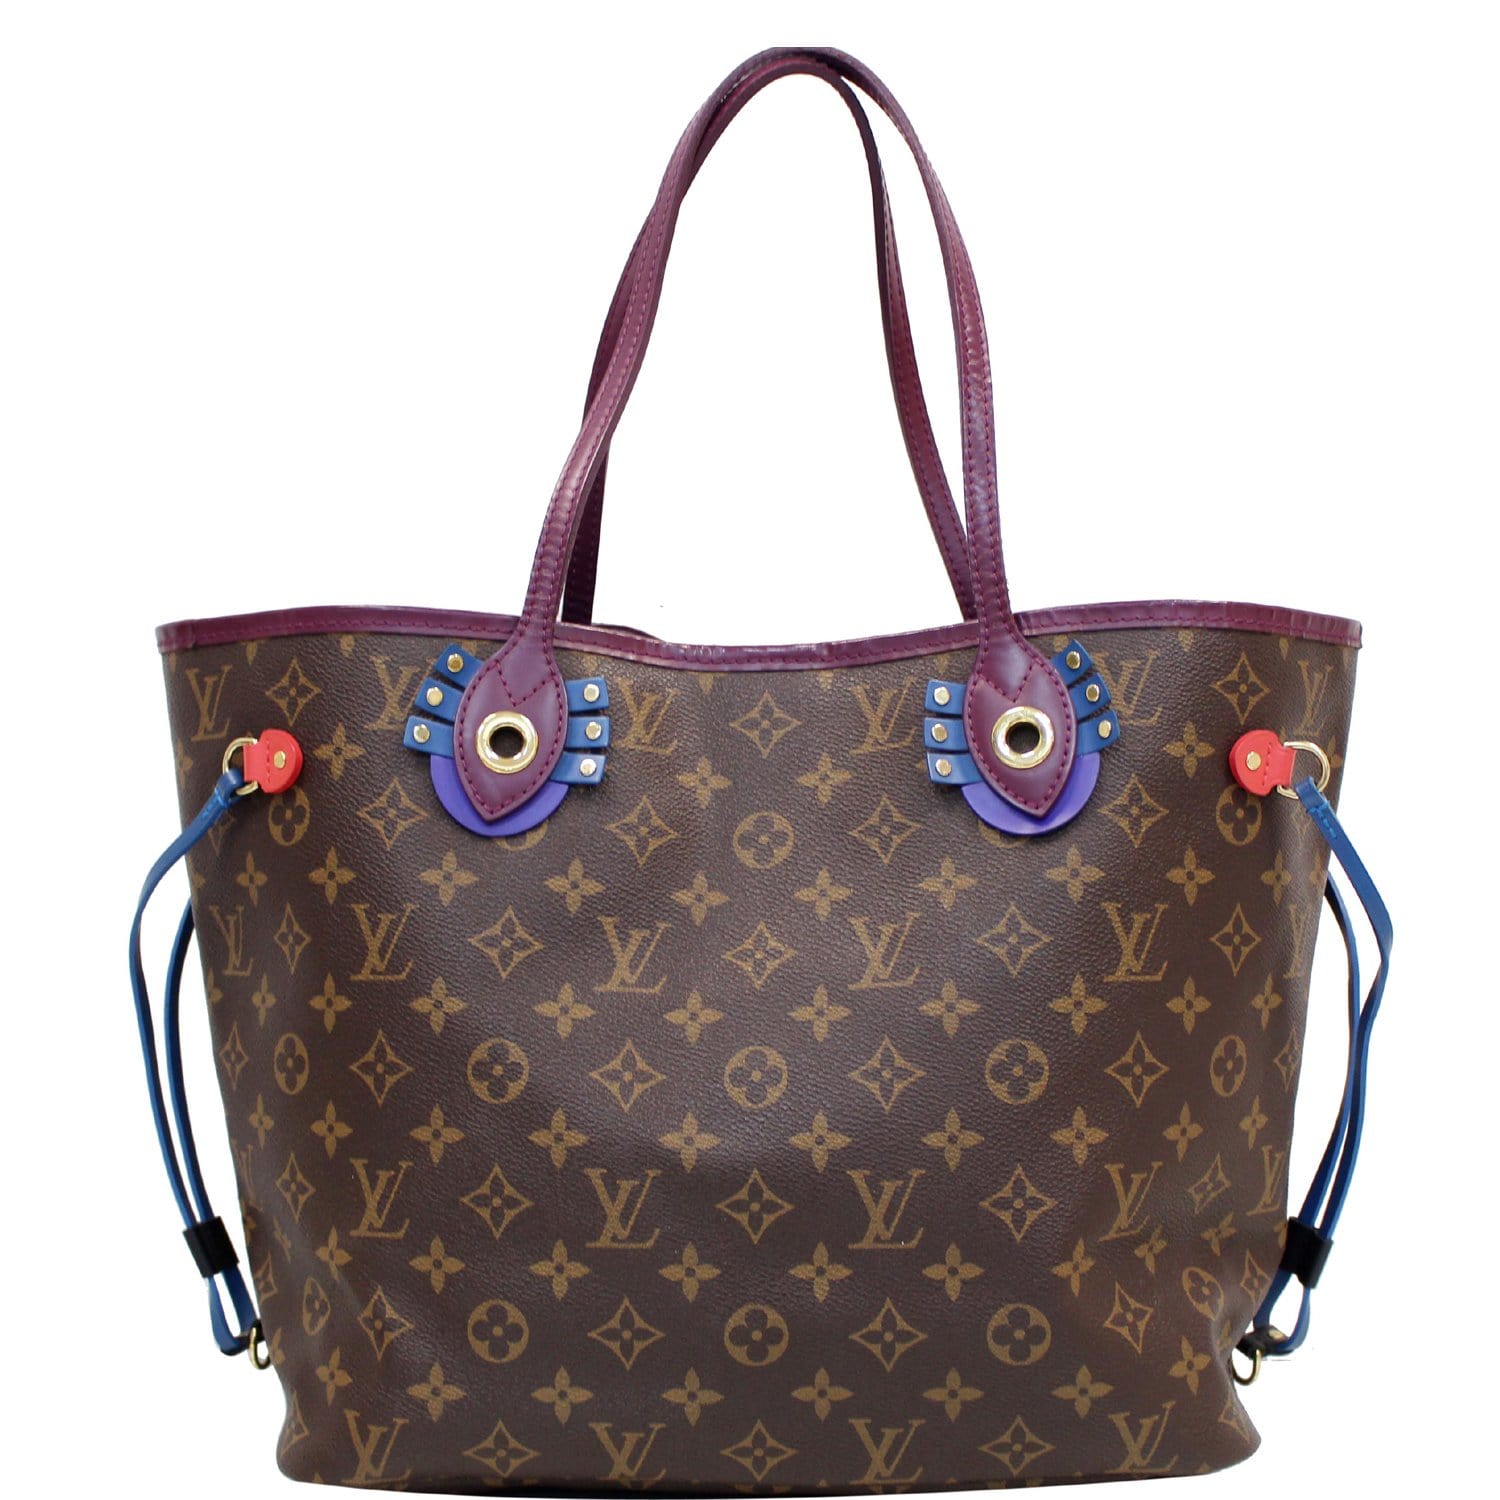 Naughtipidgins Nest - Louis Vuitton Tournelle MM Shoulder Tote in Monogram  Noir. In iconic Monogram canvas with black calfskin trimmings the Tournelle  exudes timeless style. Its elegant, curvy shape, ample interior 